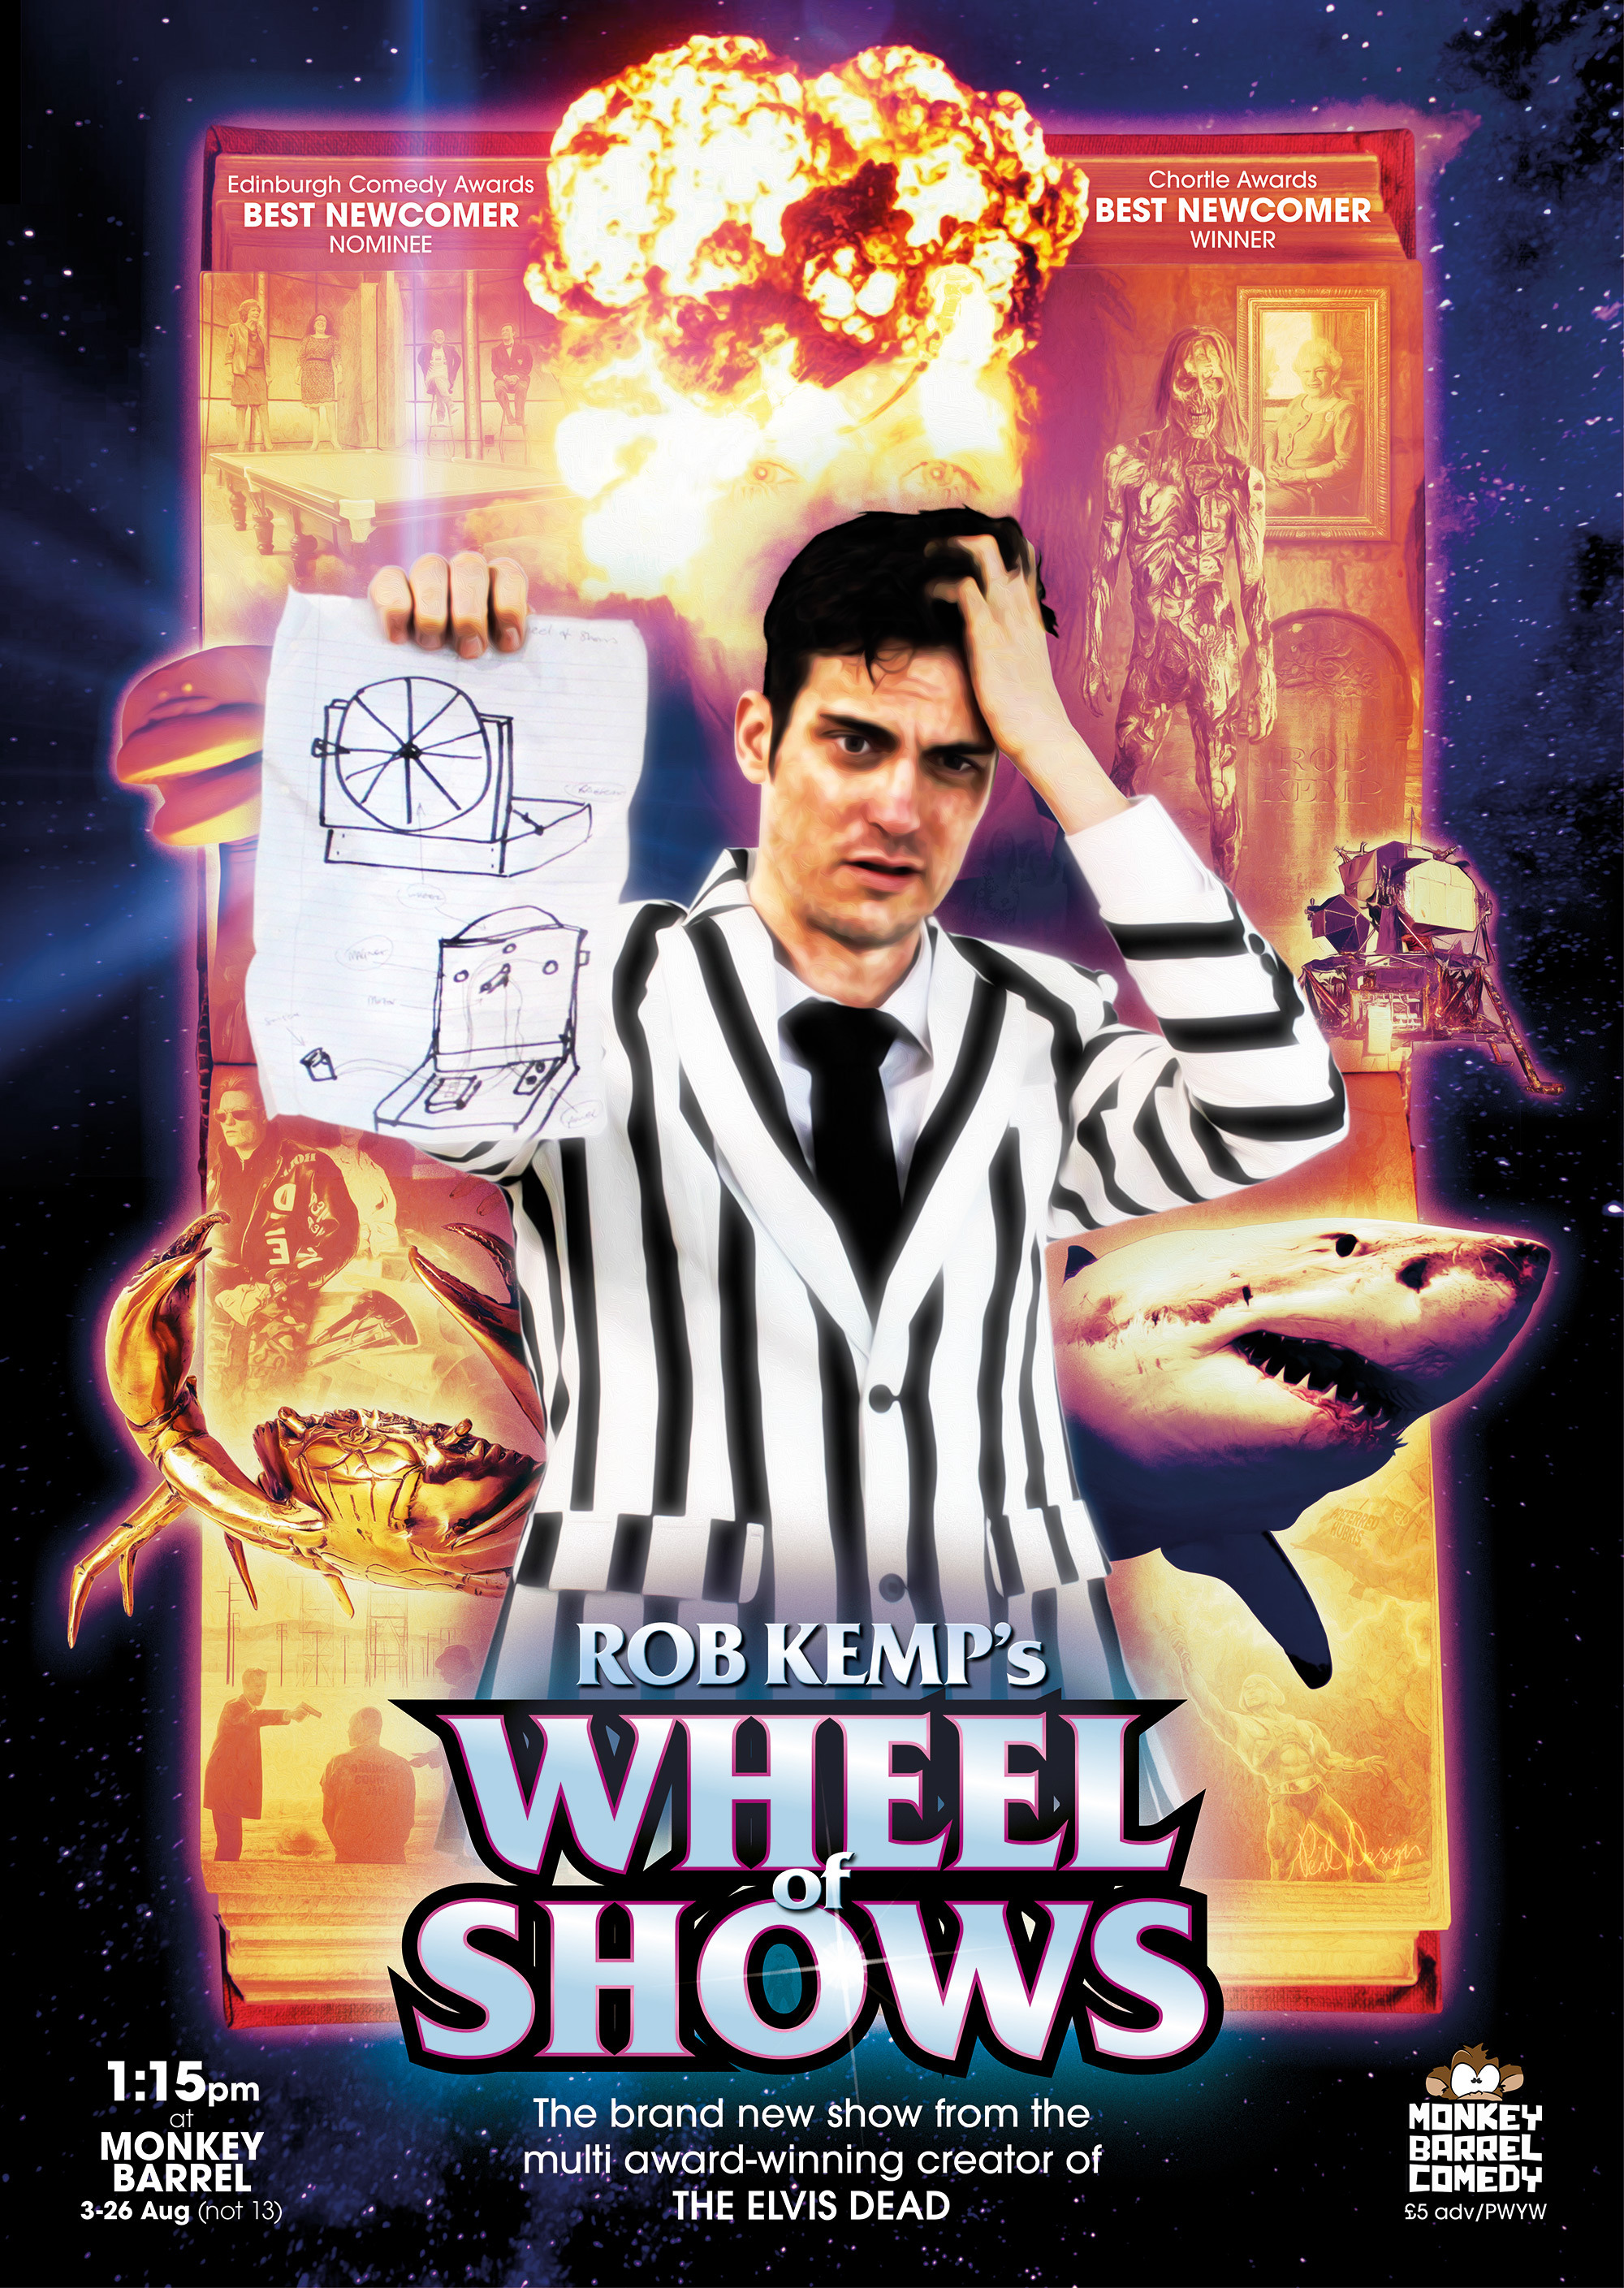 The poster for Rob Kemp's Wheel of Shows